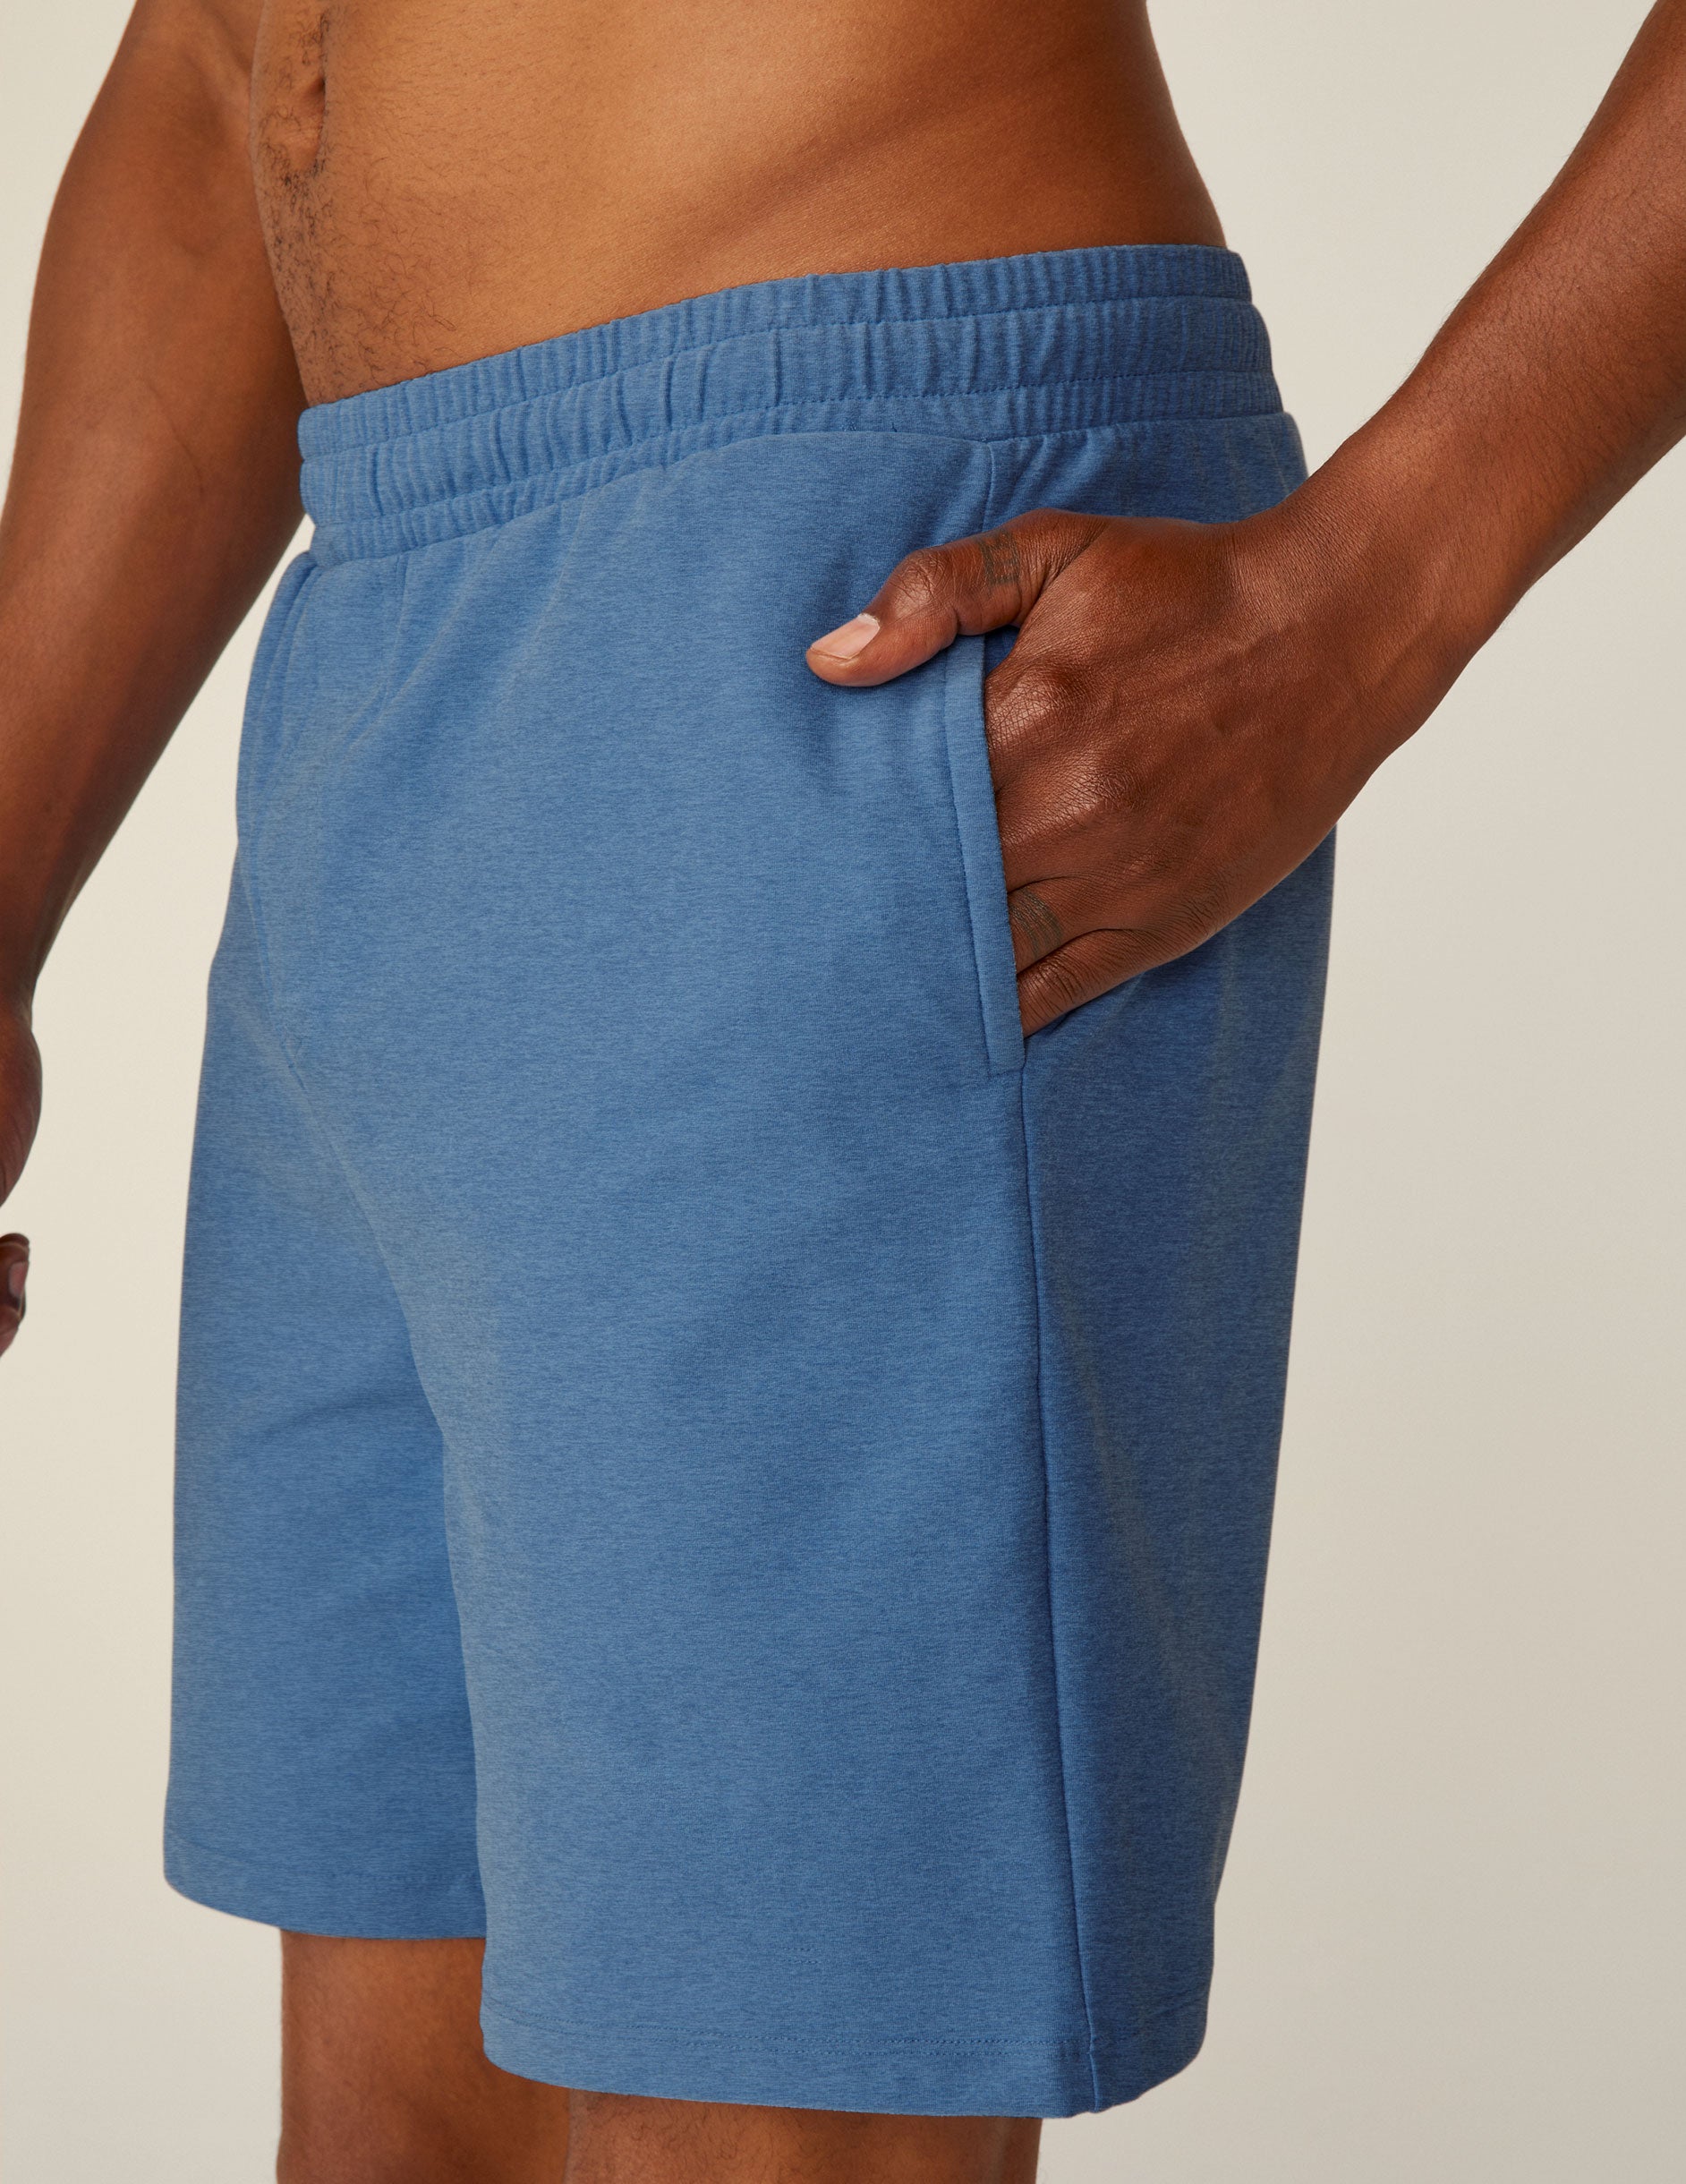 blue men's shorts with pockets. 